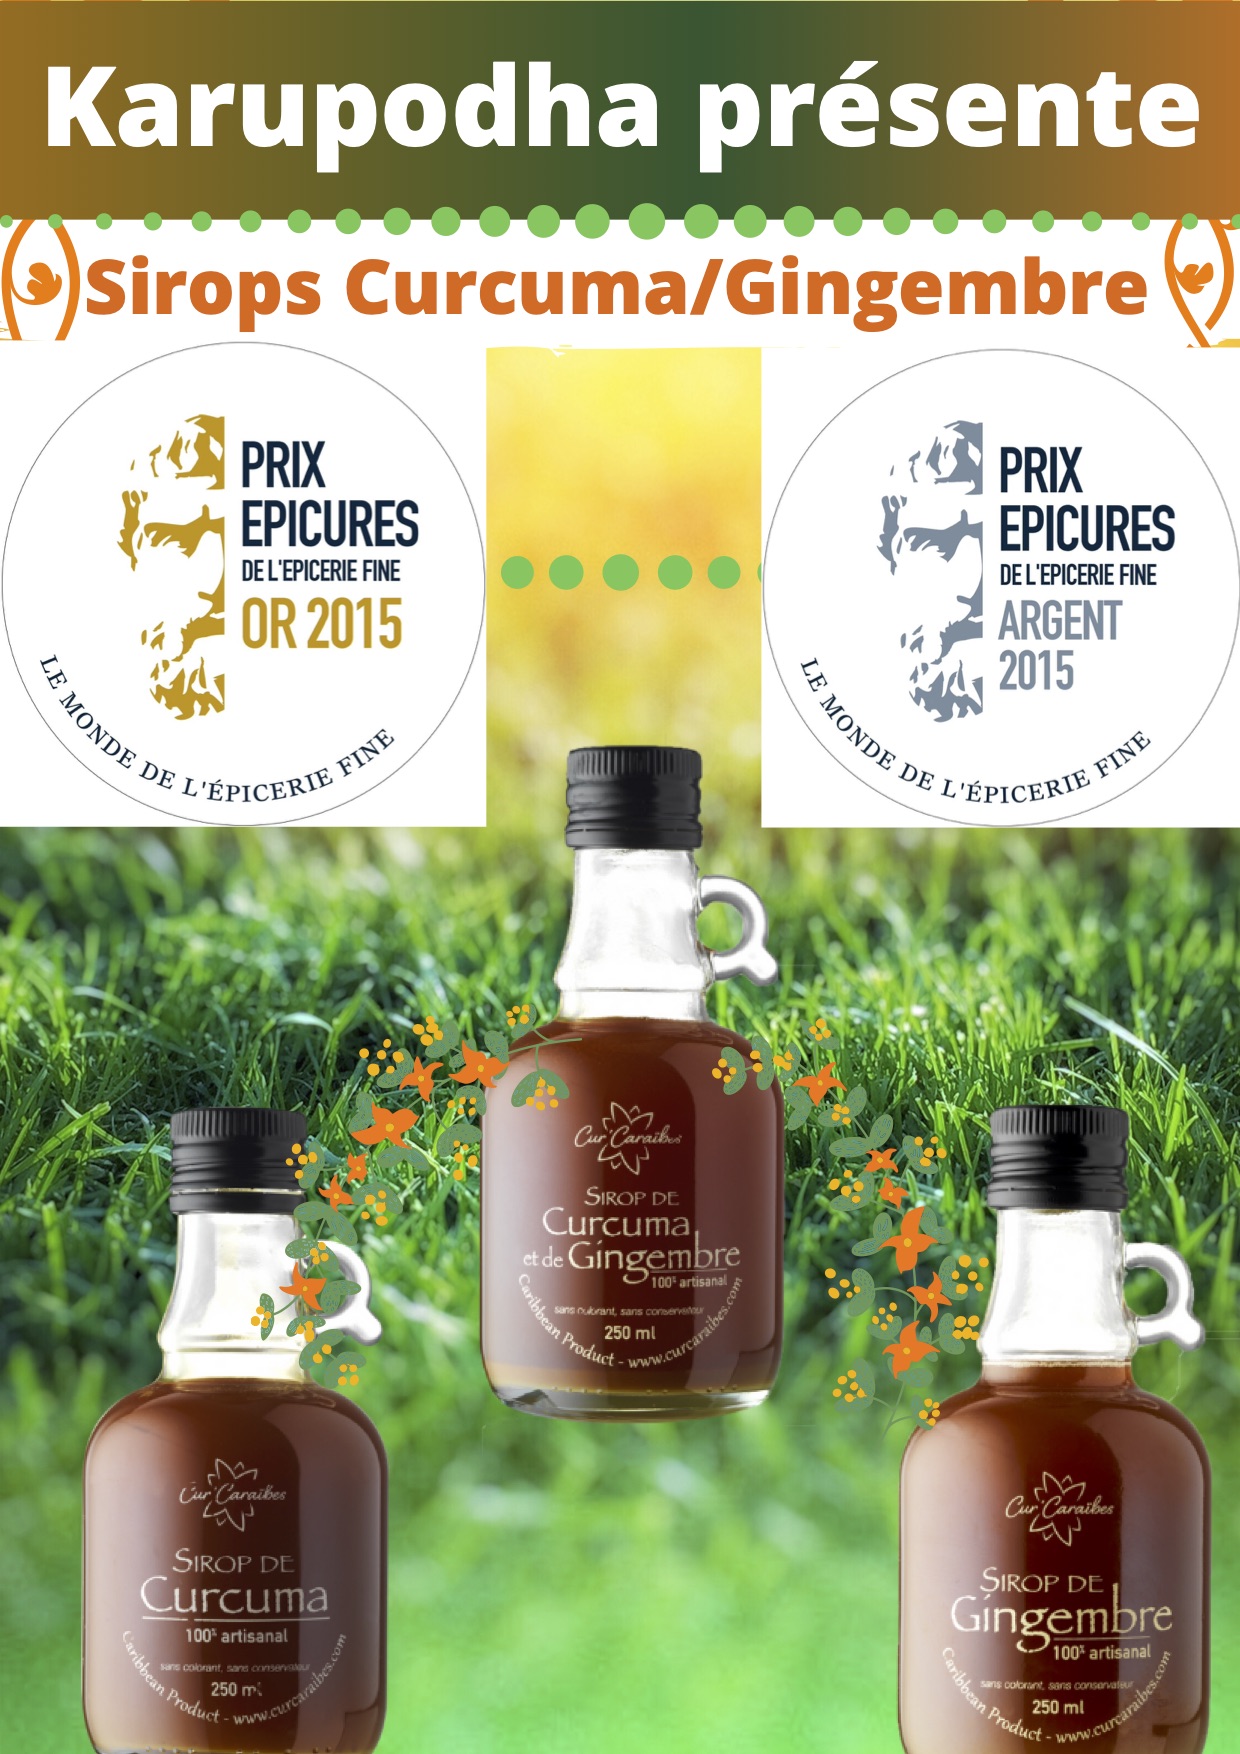 Sirop de gingembre - Epicerie - Guadeloupe Forever